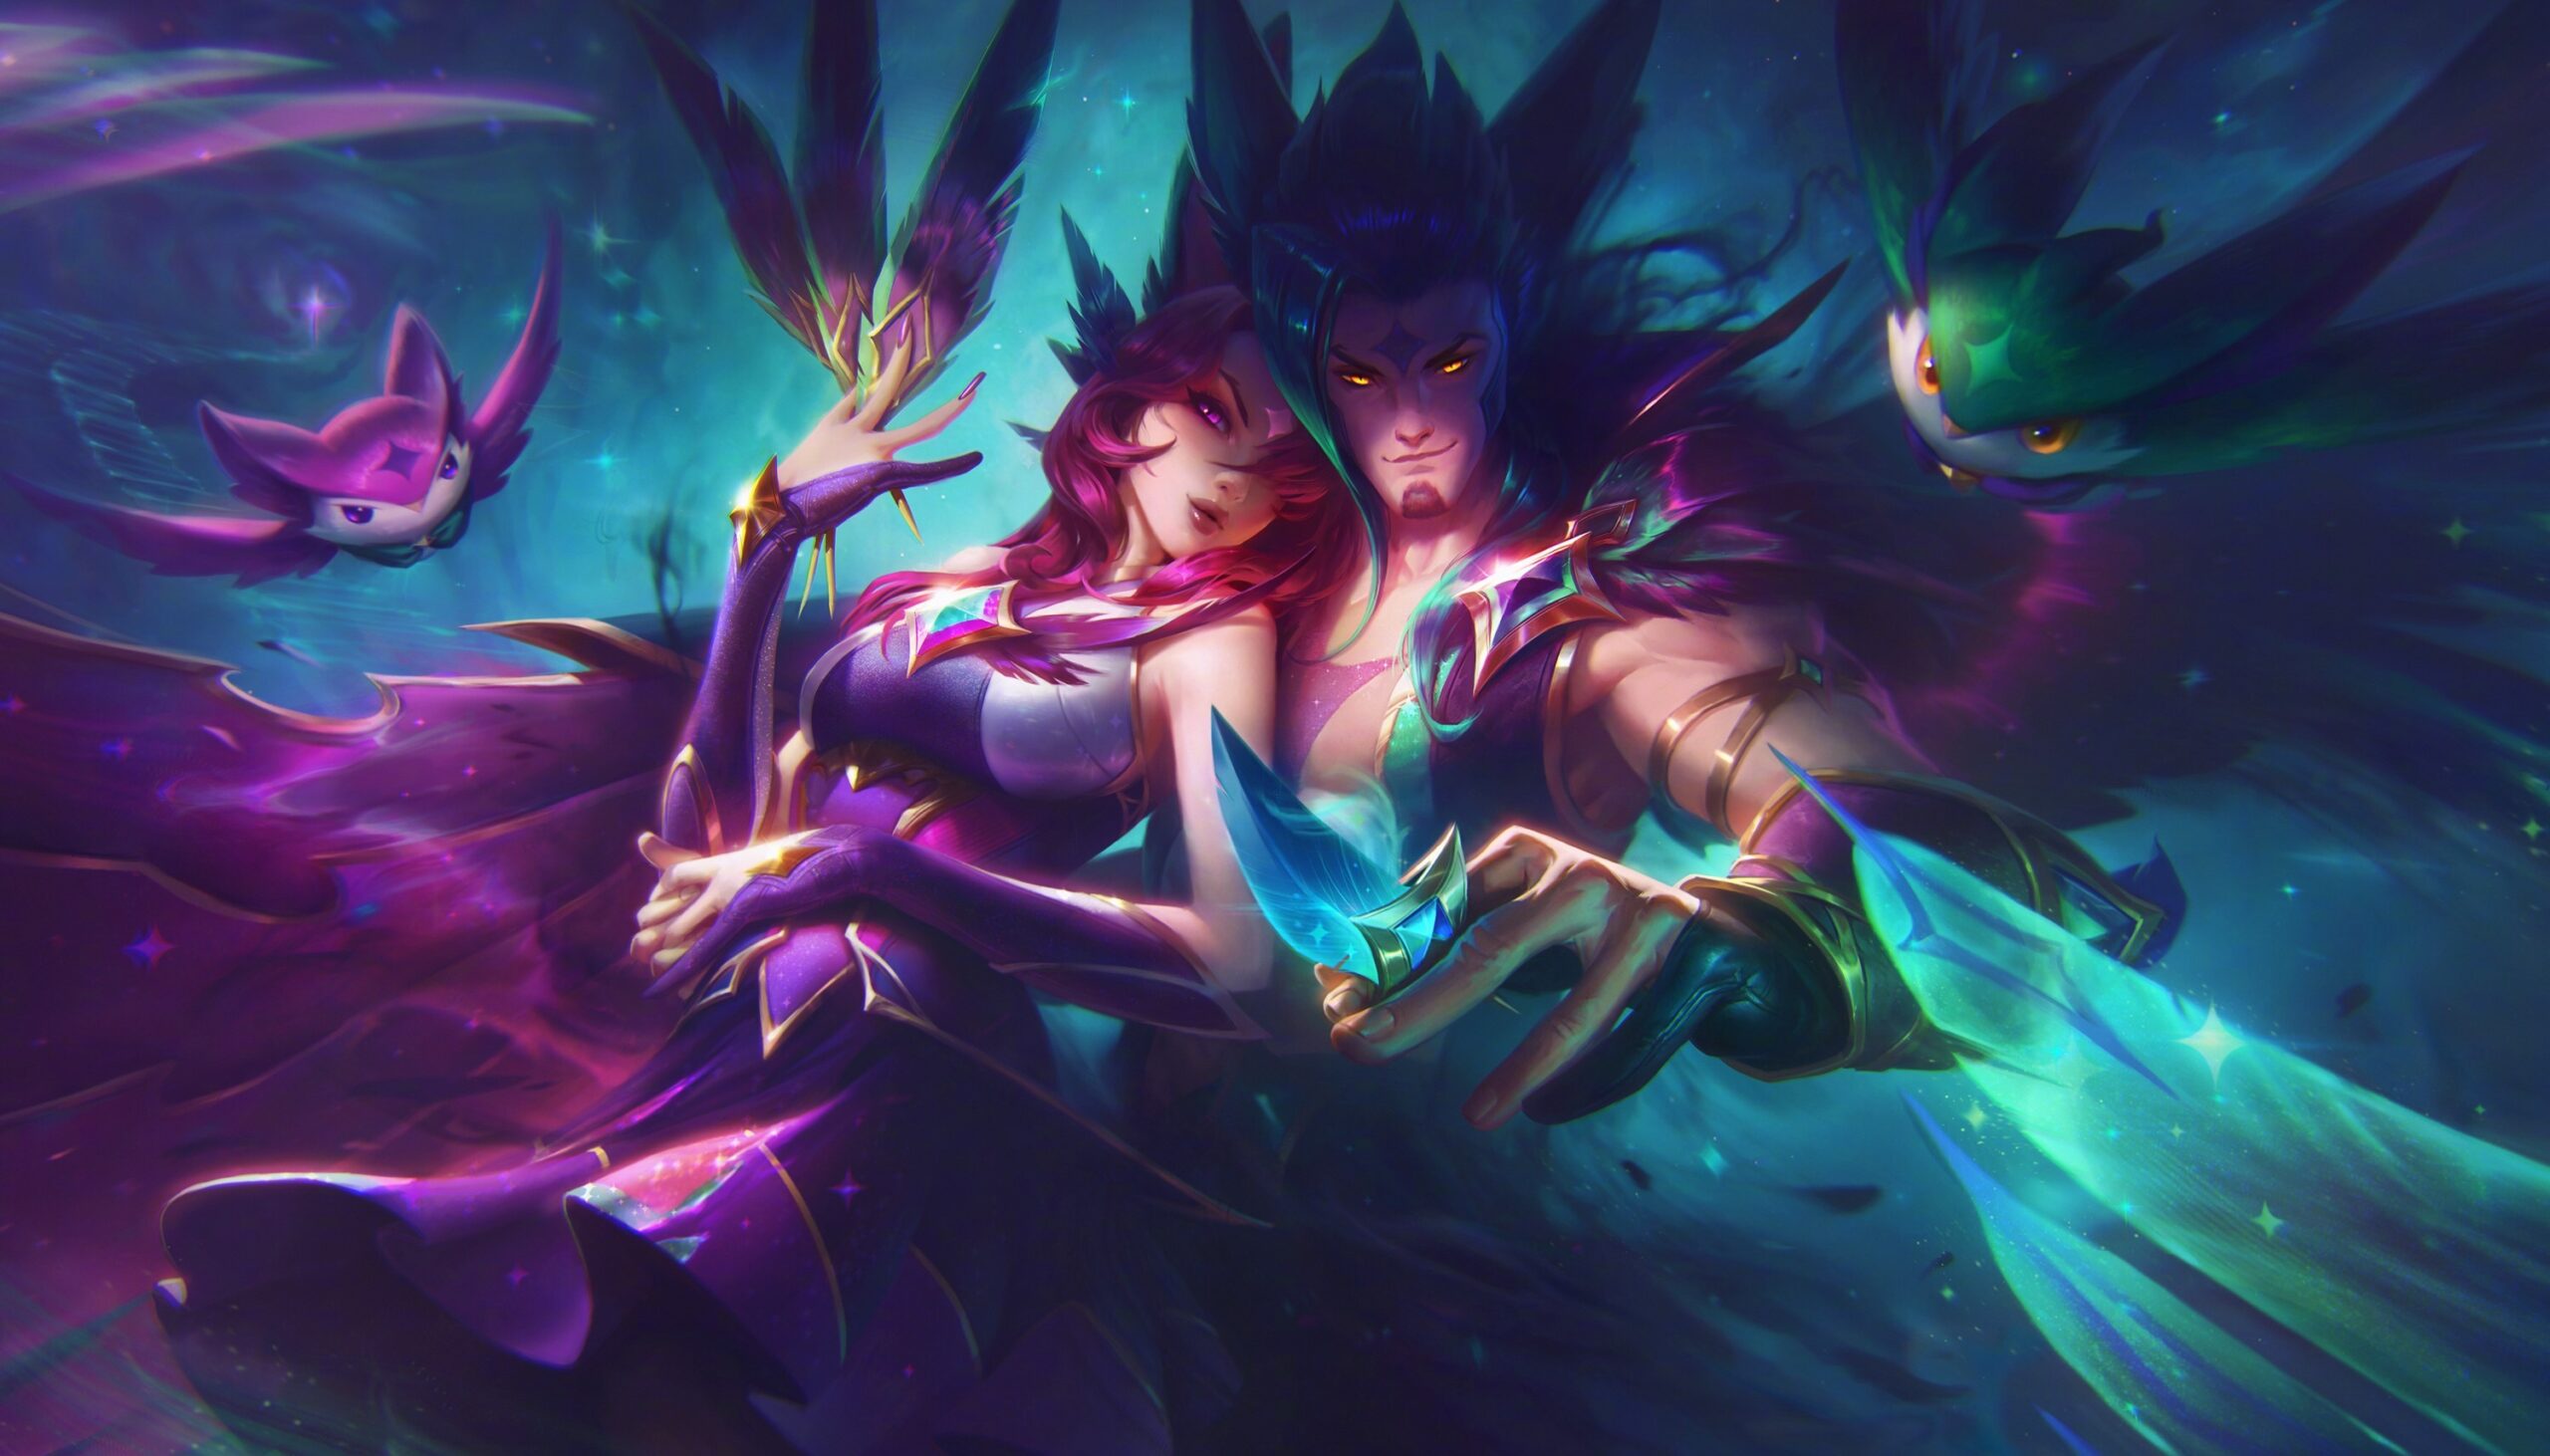 Learn the new star guardian skins